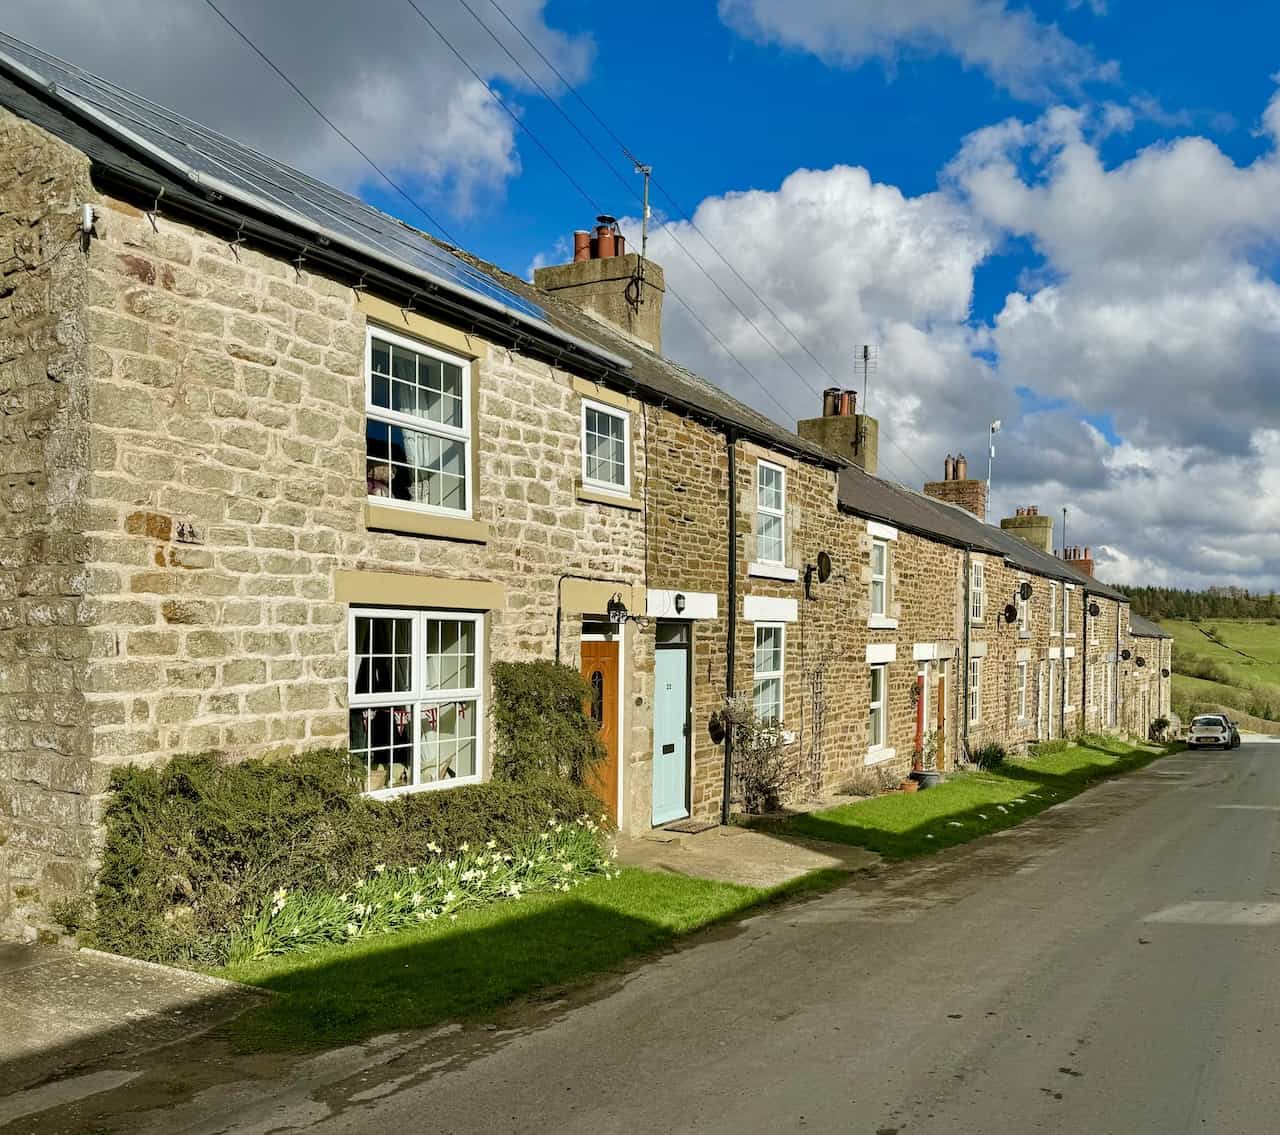 Hill Cottages on Daleside Road, exemplifying terraced housing in Rosedale East's scenic surroundings.
